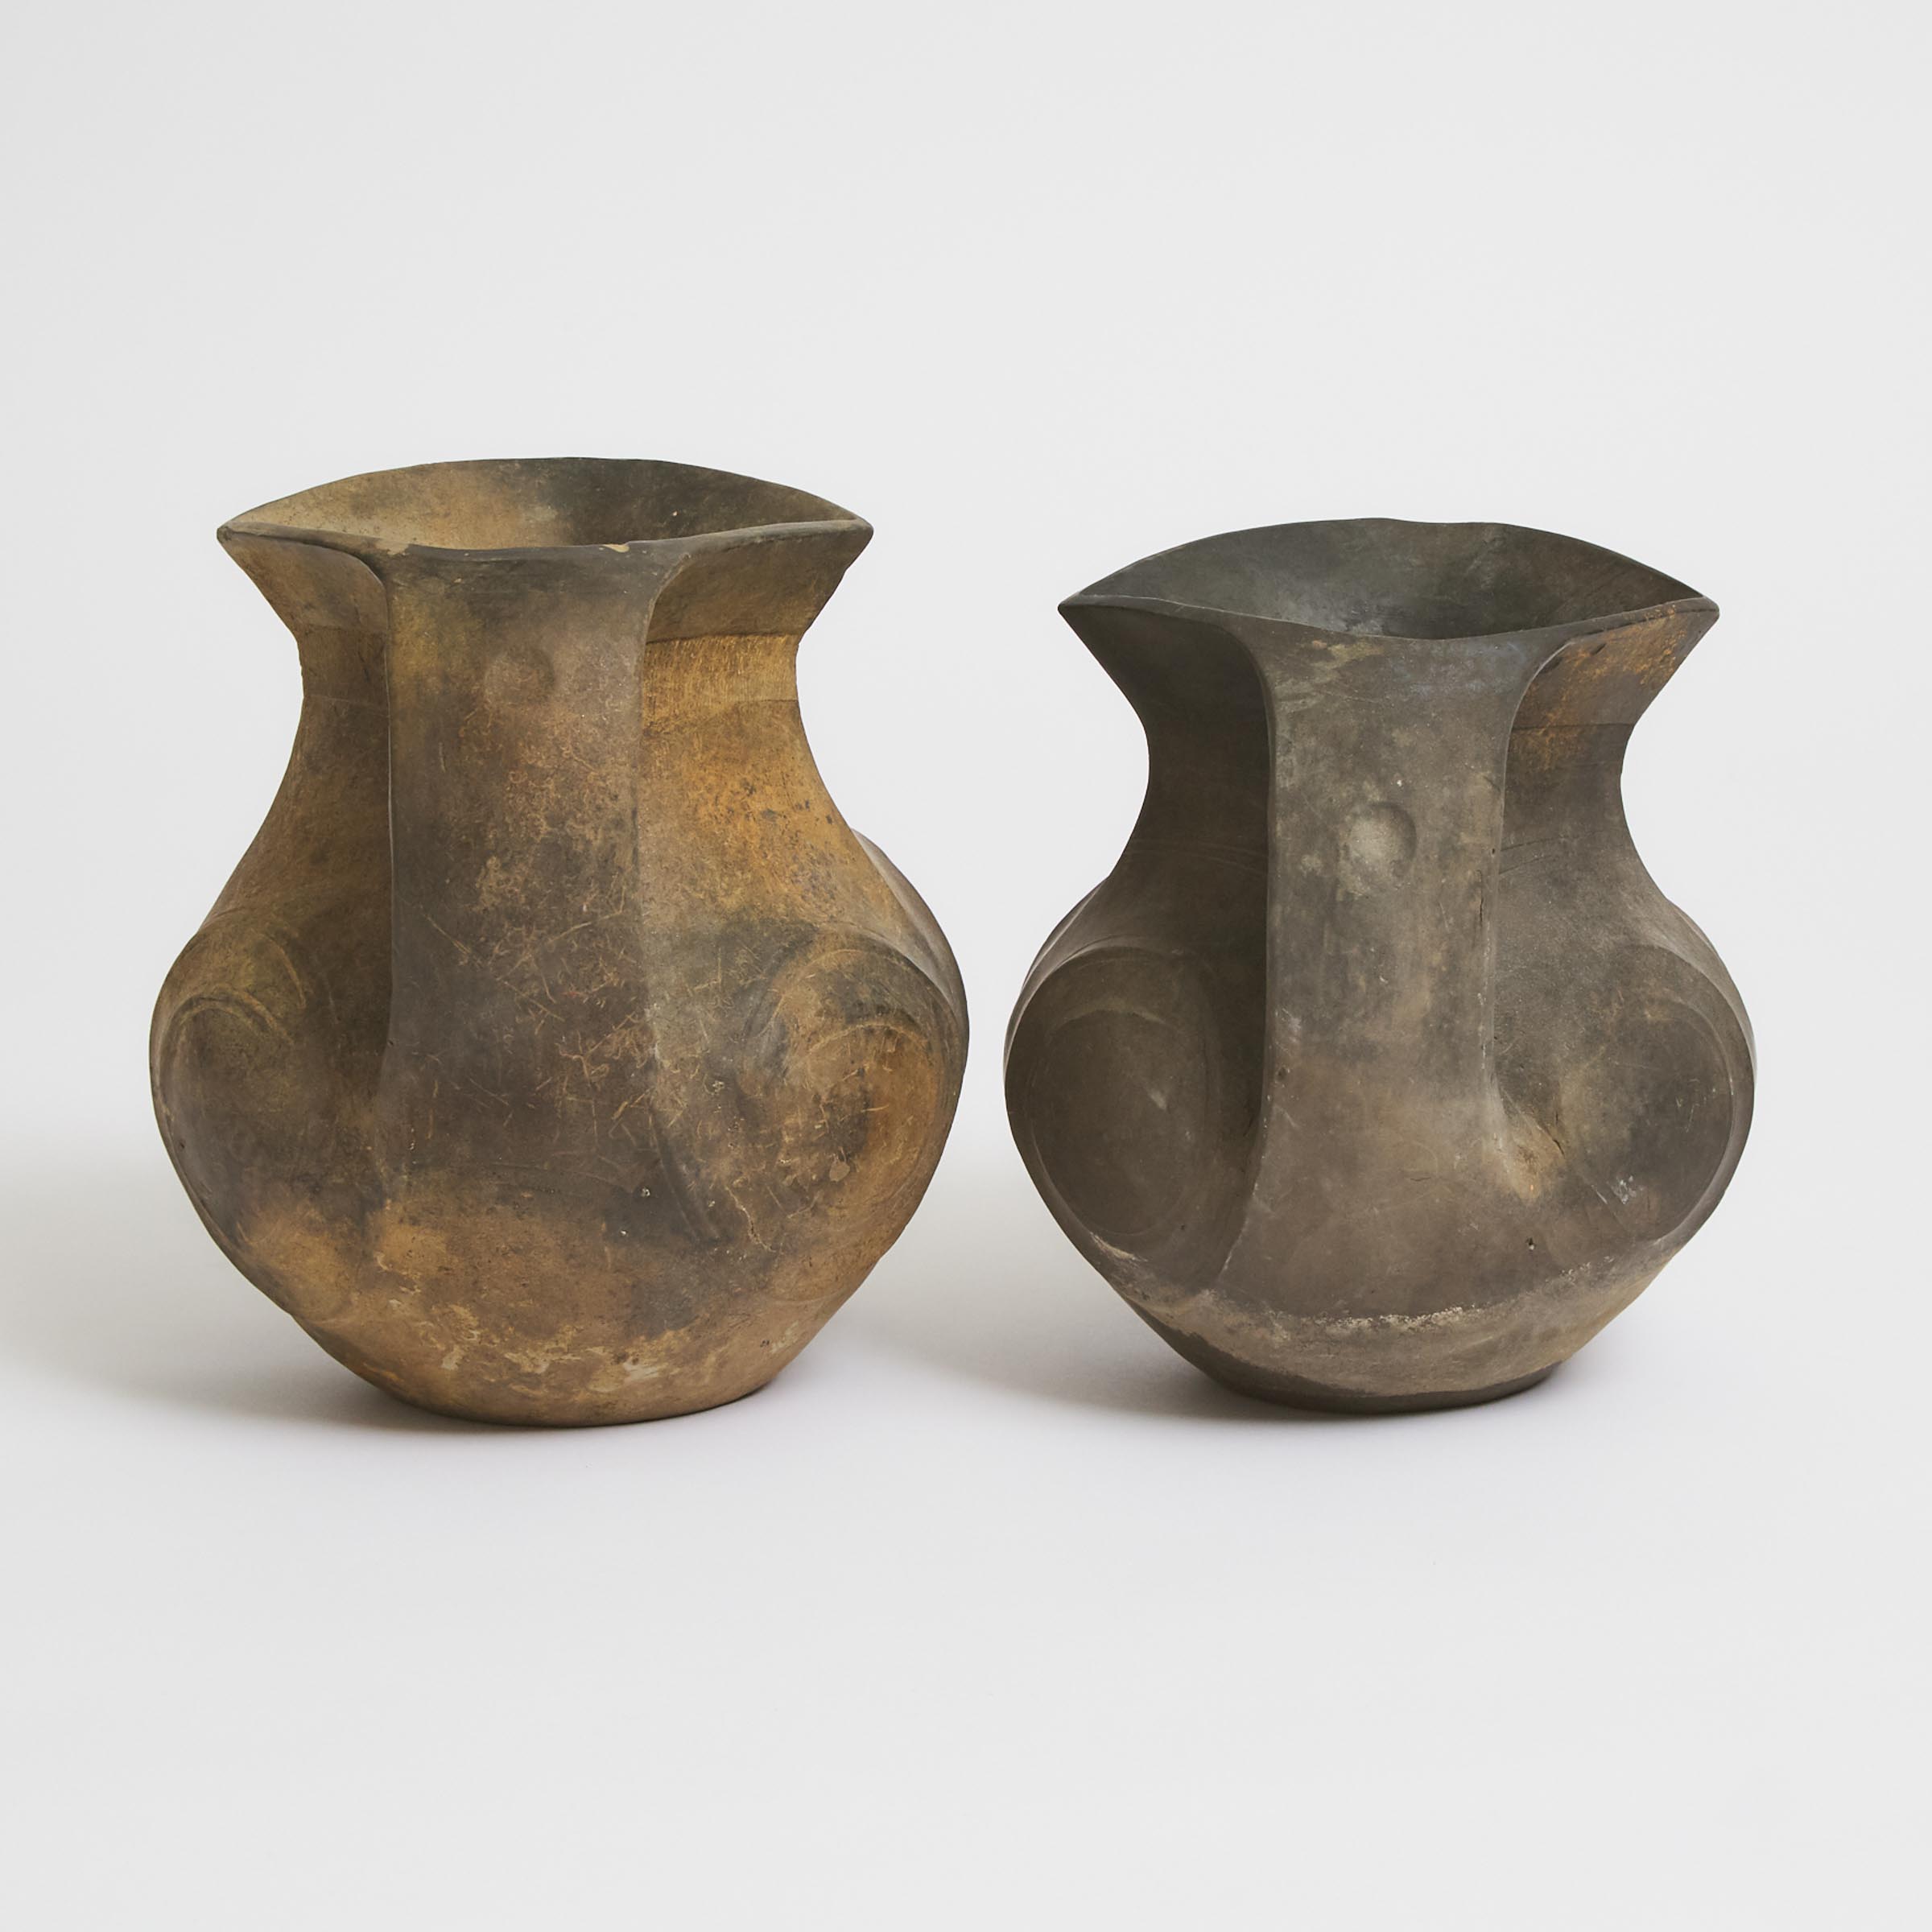 Two Small Black Pottery Amphorae, Han Dynasty (206 BC-220 AD)